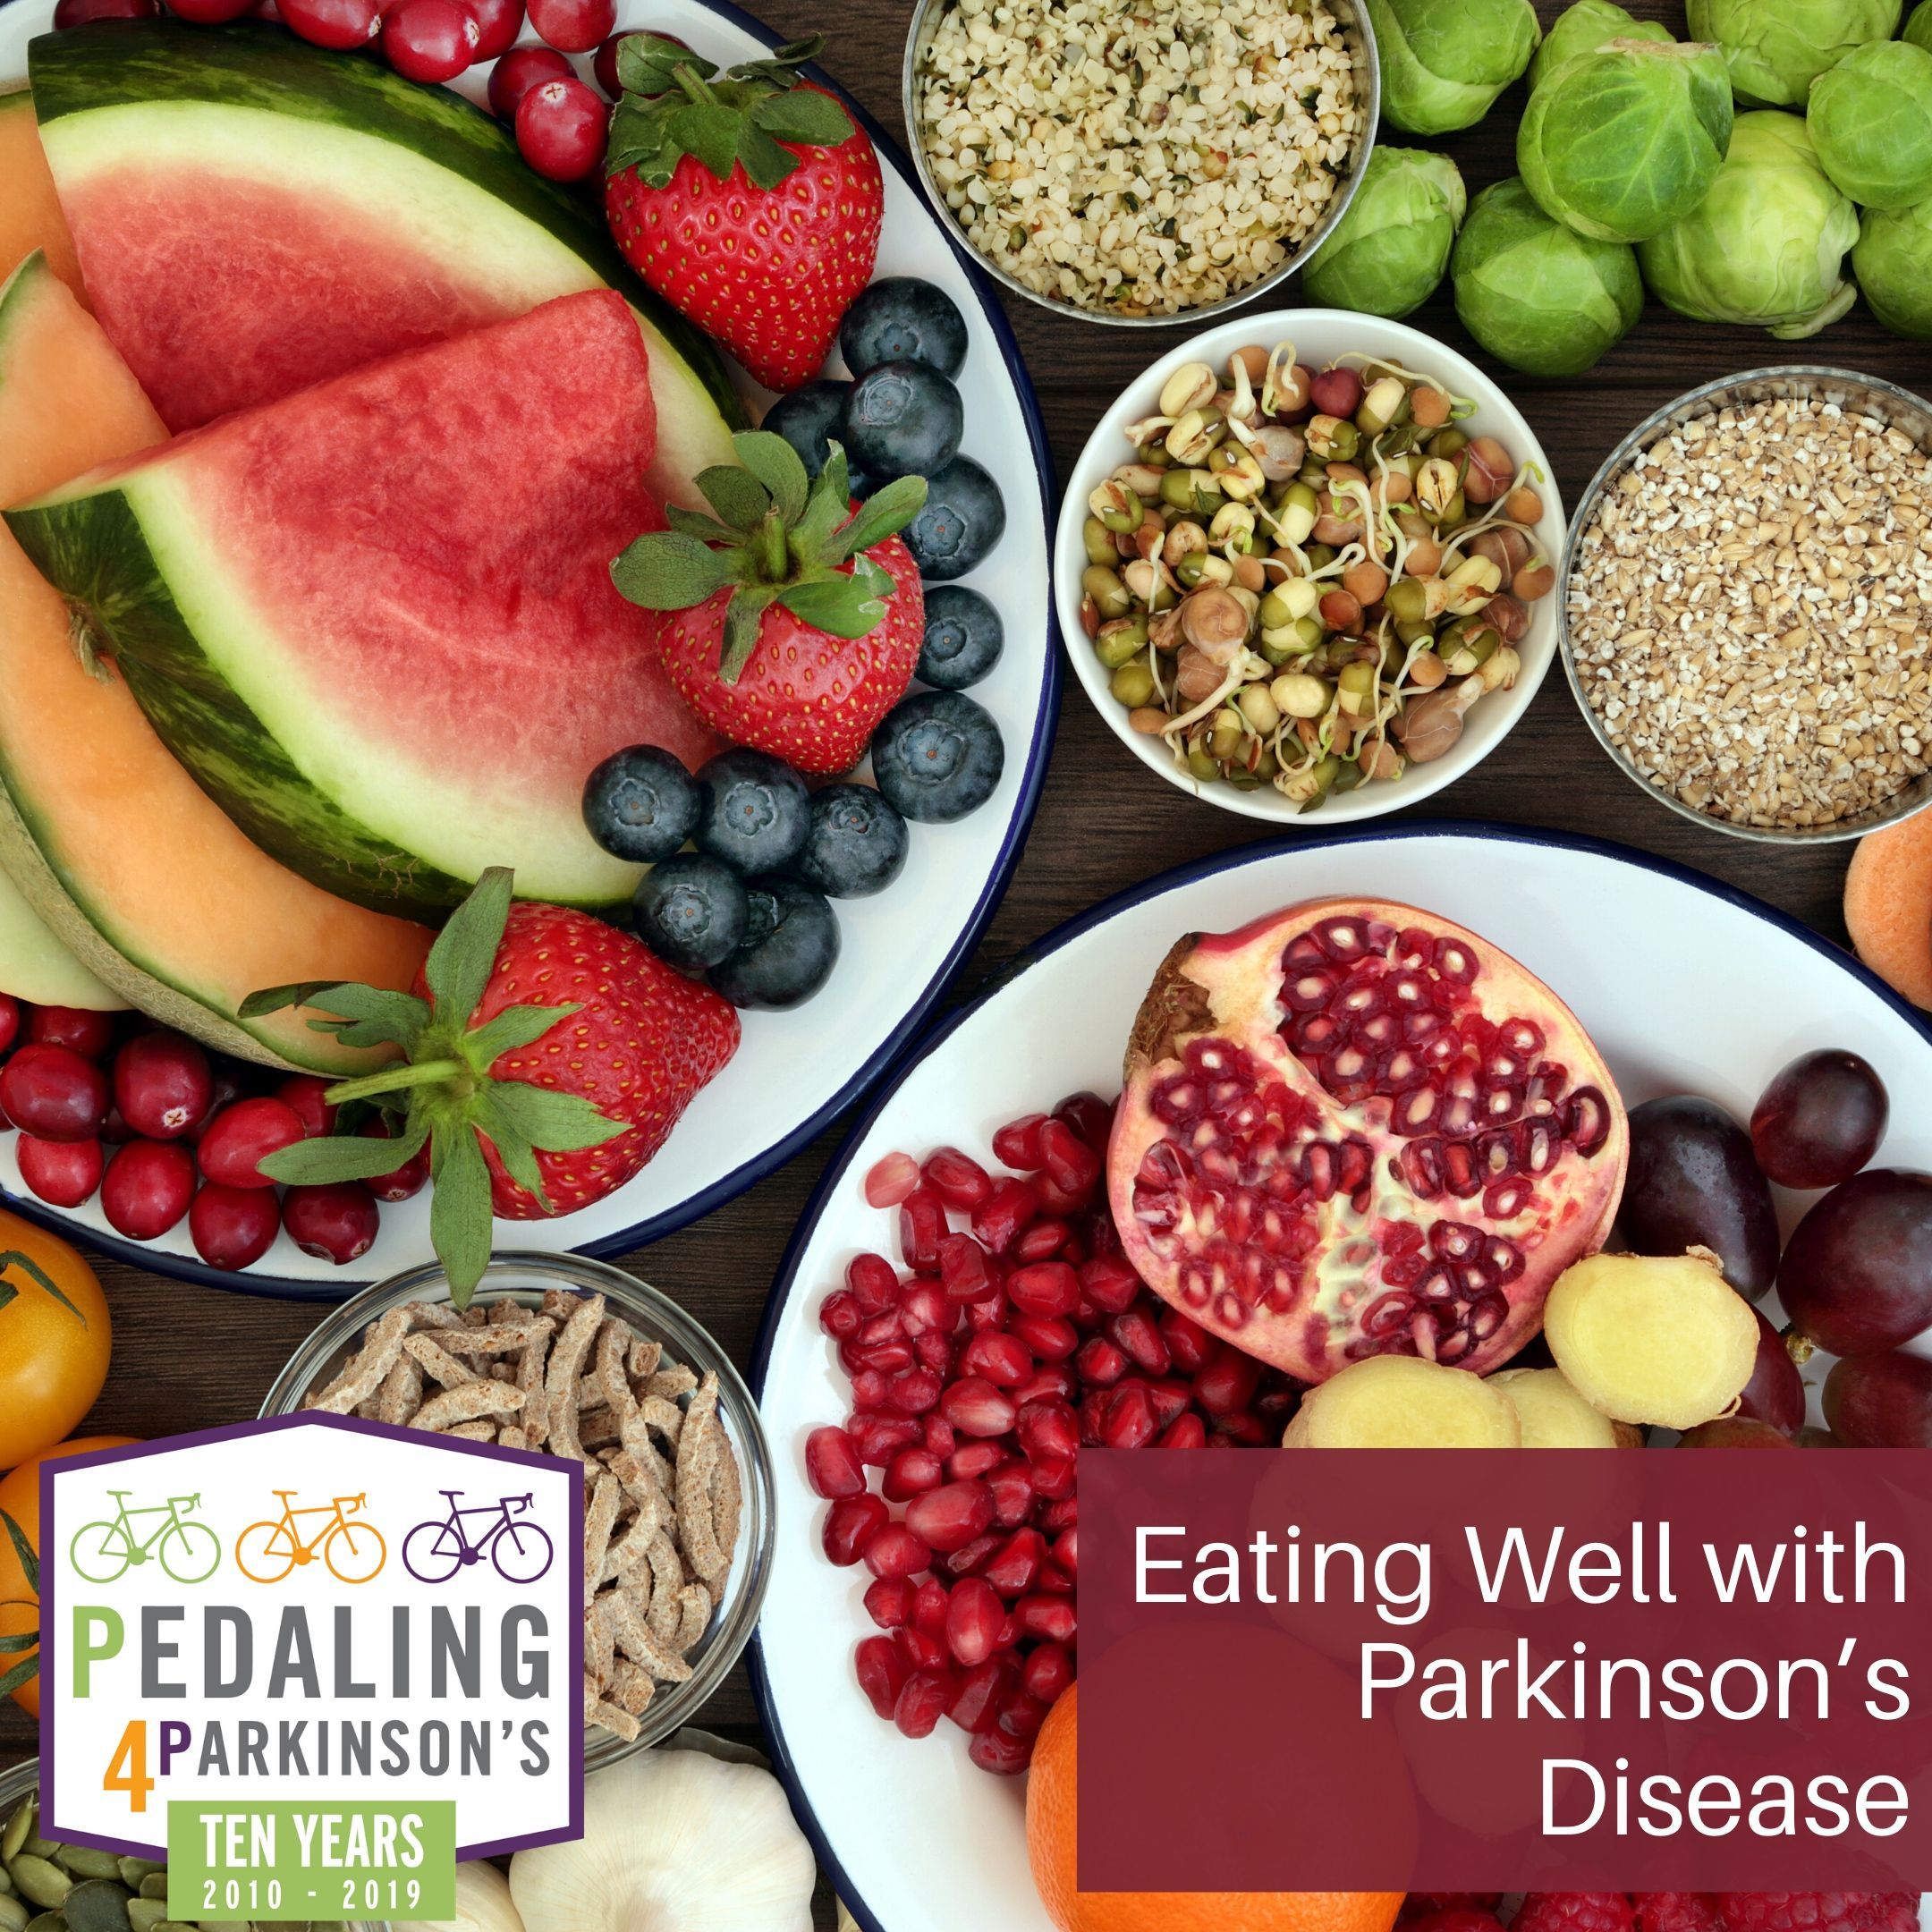 Podcast: Eating Well with Parkinsonâs Disease (Webinar)